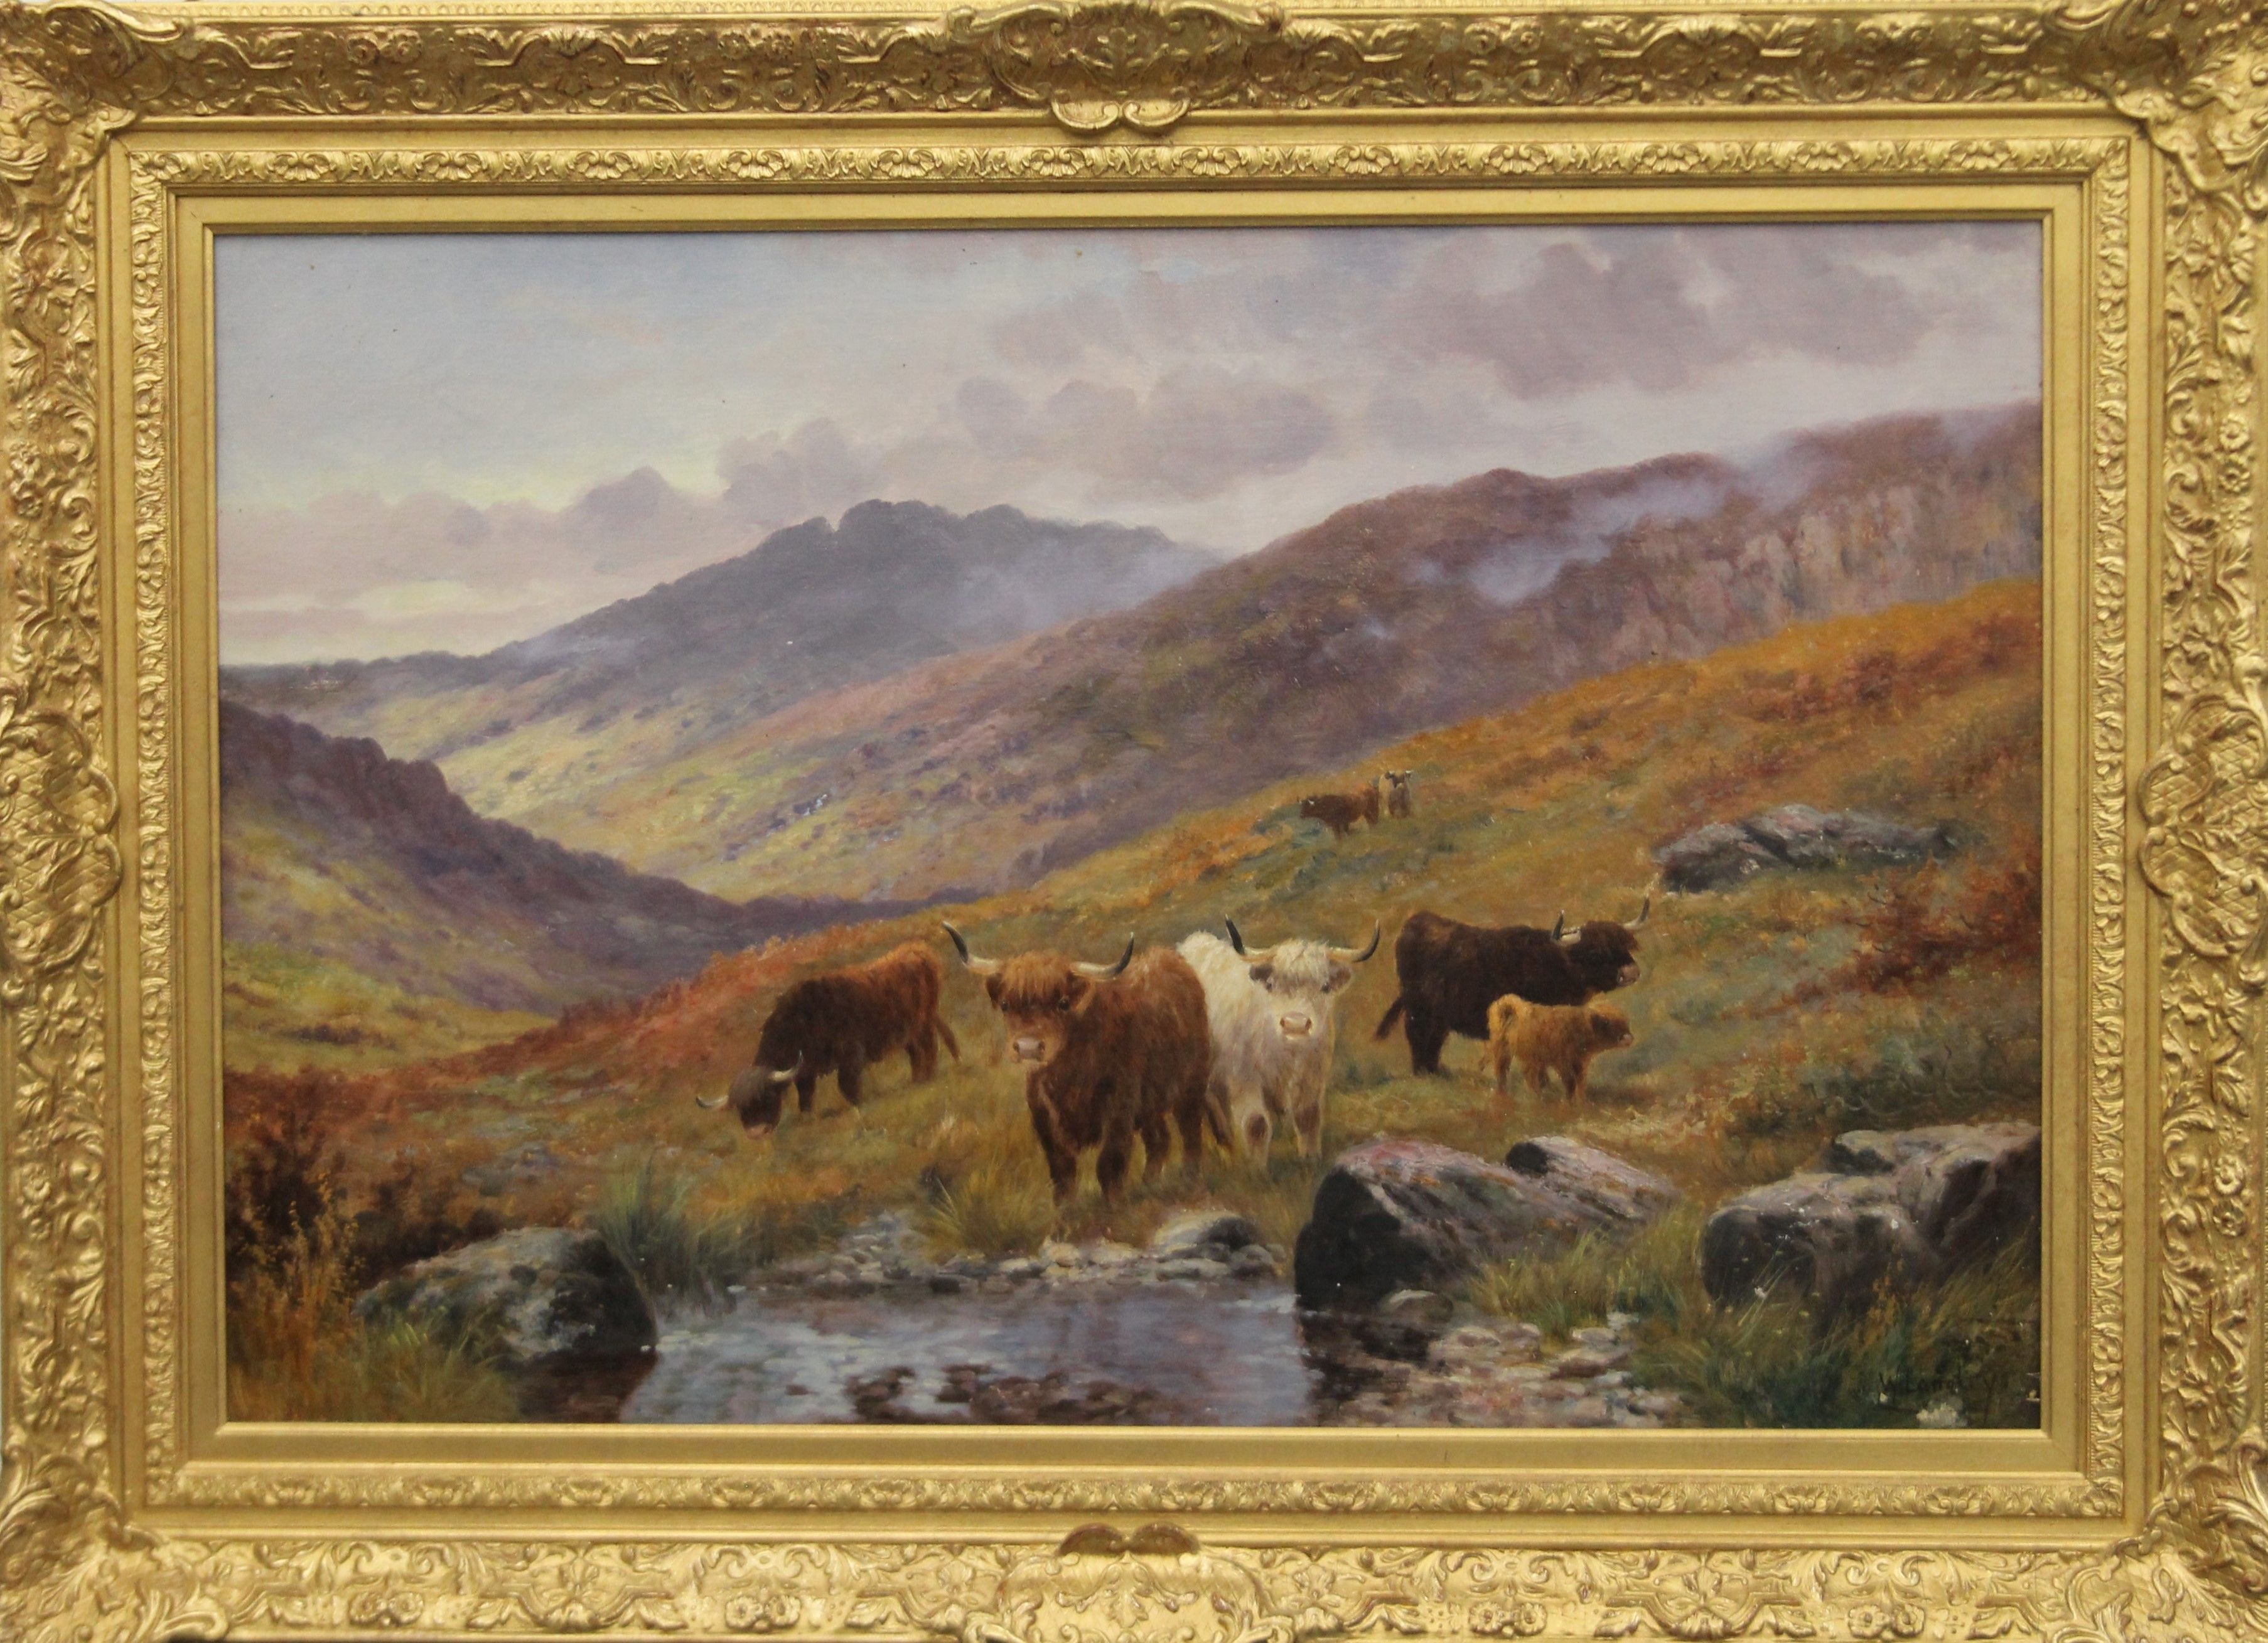 W LANGLEY, Highland Cattle within a Landscape, oil on canvas, signed, framed. 75 x 49 cm. - Image 2 of 3